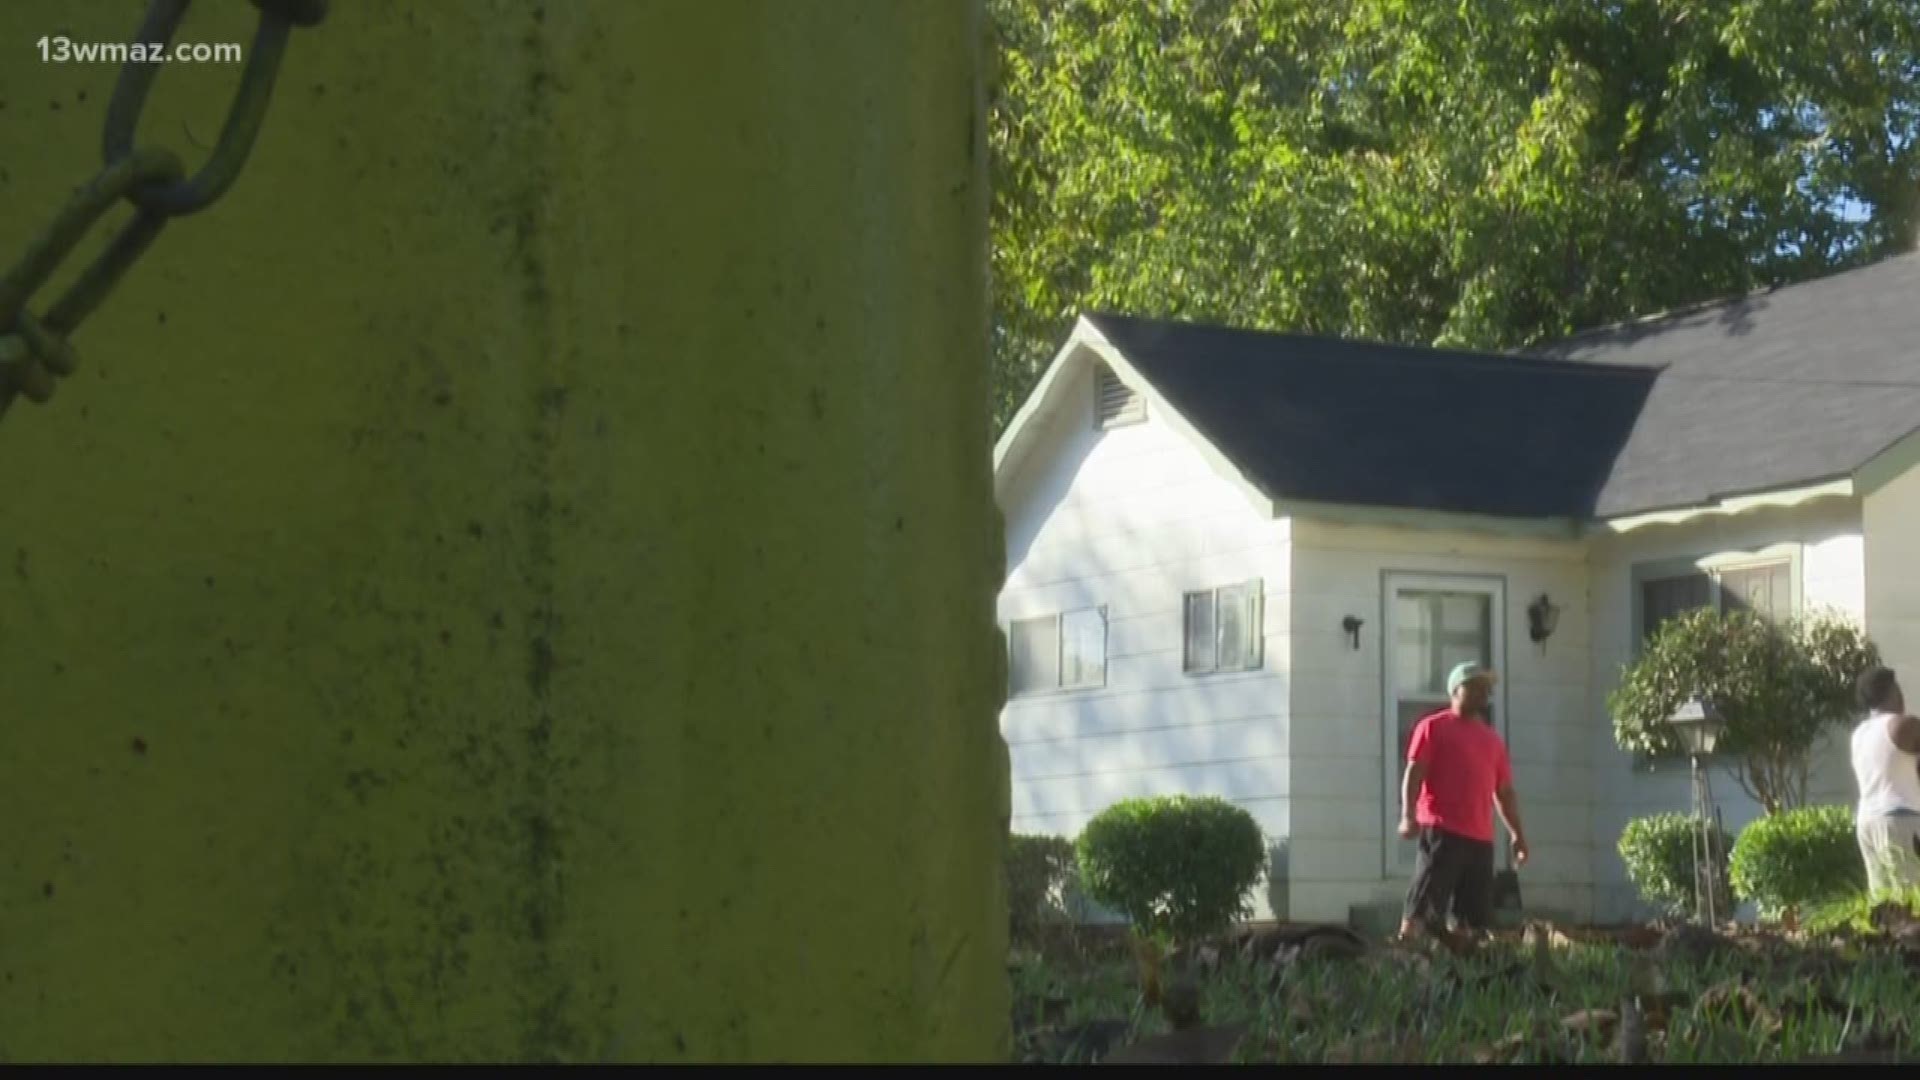 Family coping after home invasion